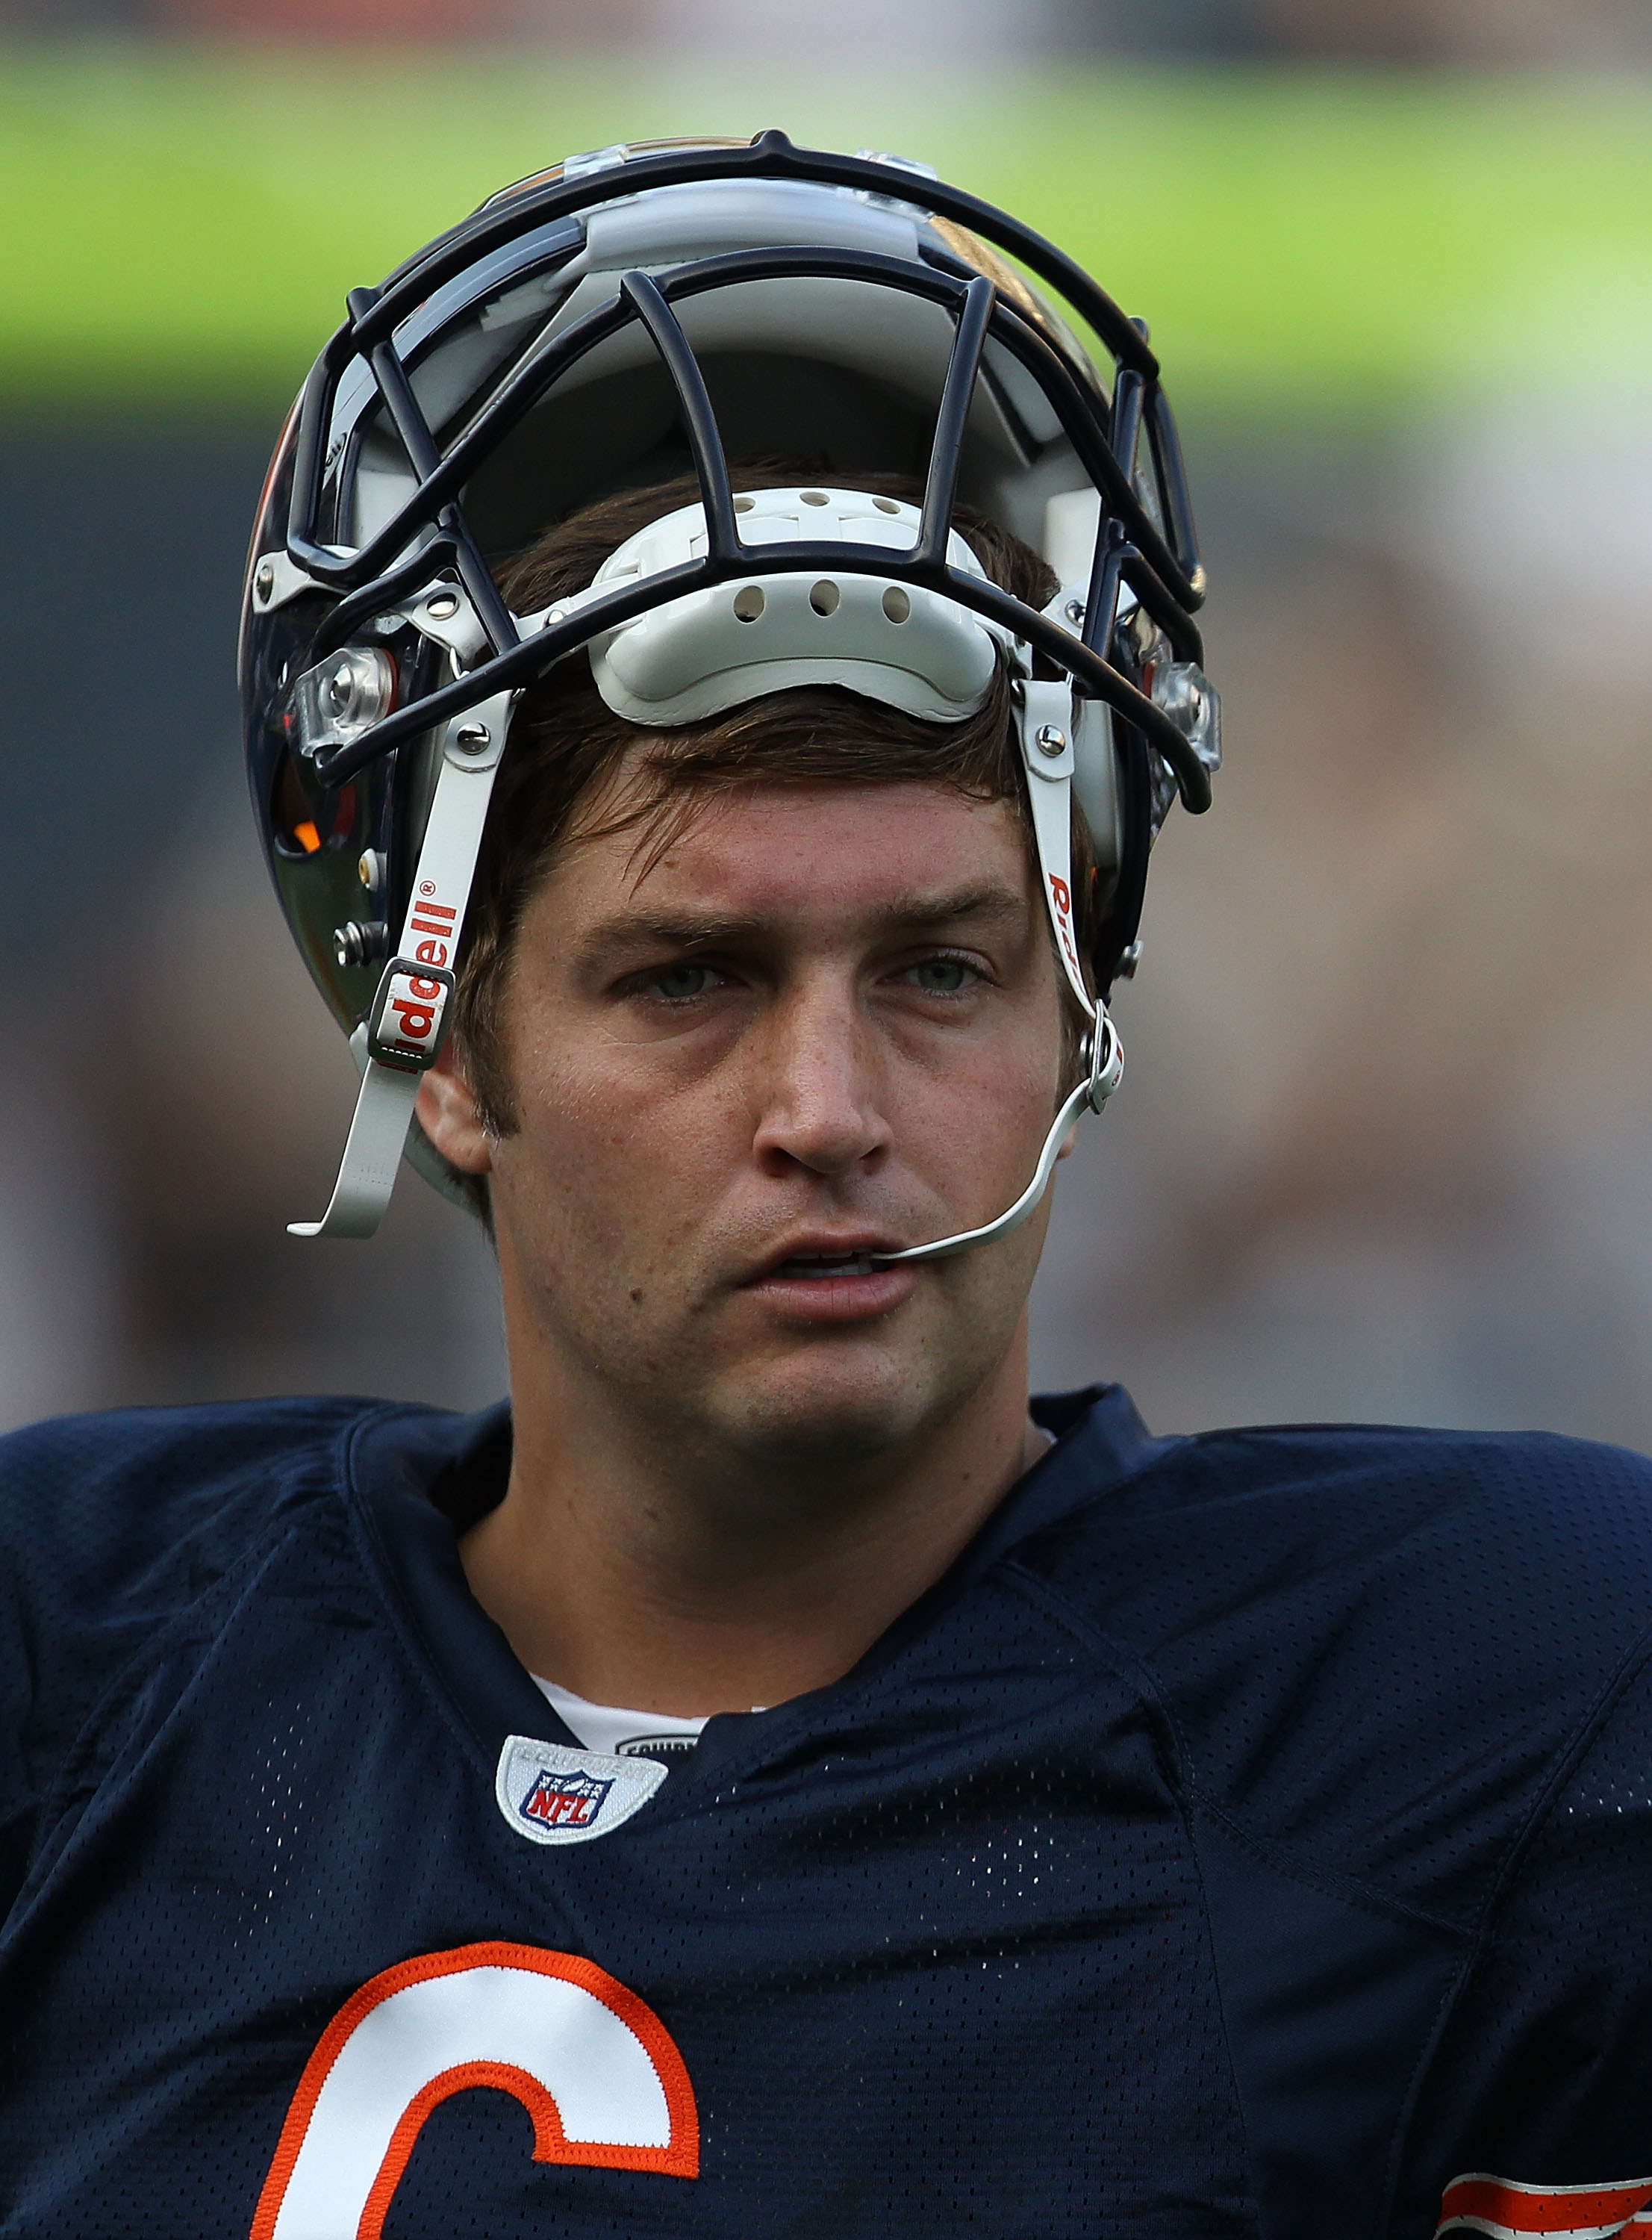 CHICAGO - AUGUST 21: Jay Cutler #6 of the Chicago Bears takes a break during warm-ups before a preseason game against the Oakland Raiders at Soldier Field on August 21, 2010 in Chicago, Illinois. The Raiders defeated the Bears 32-17. (Photo by Jonathan Da